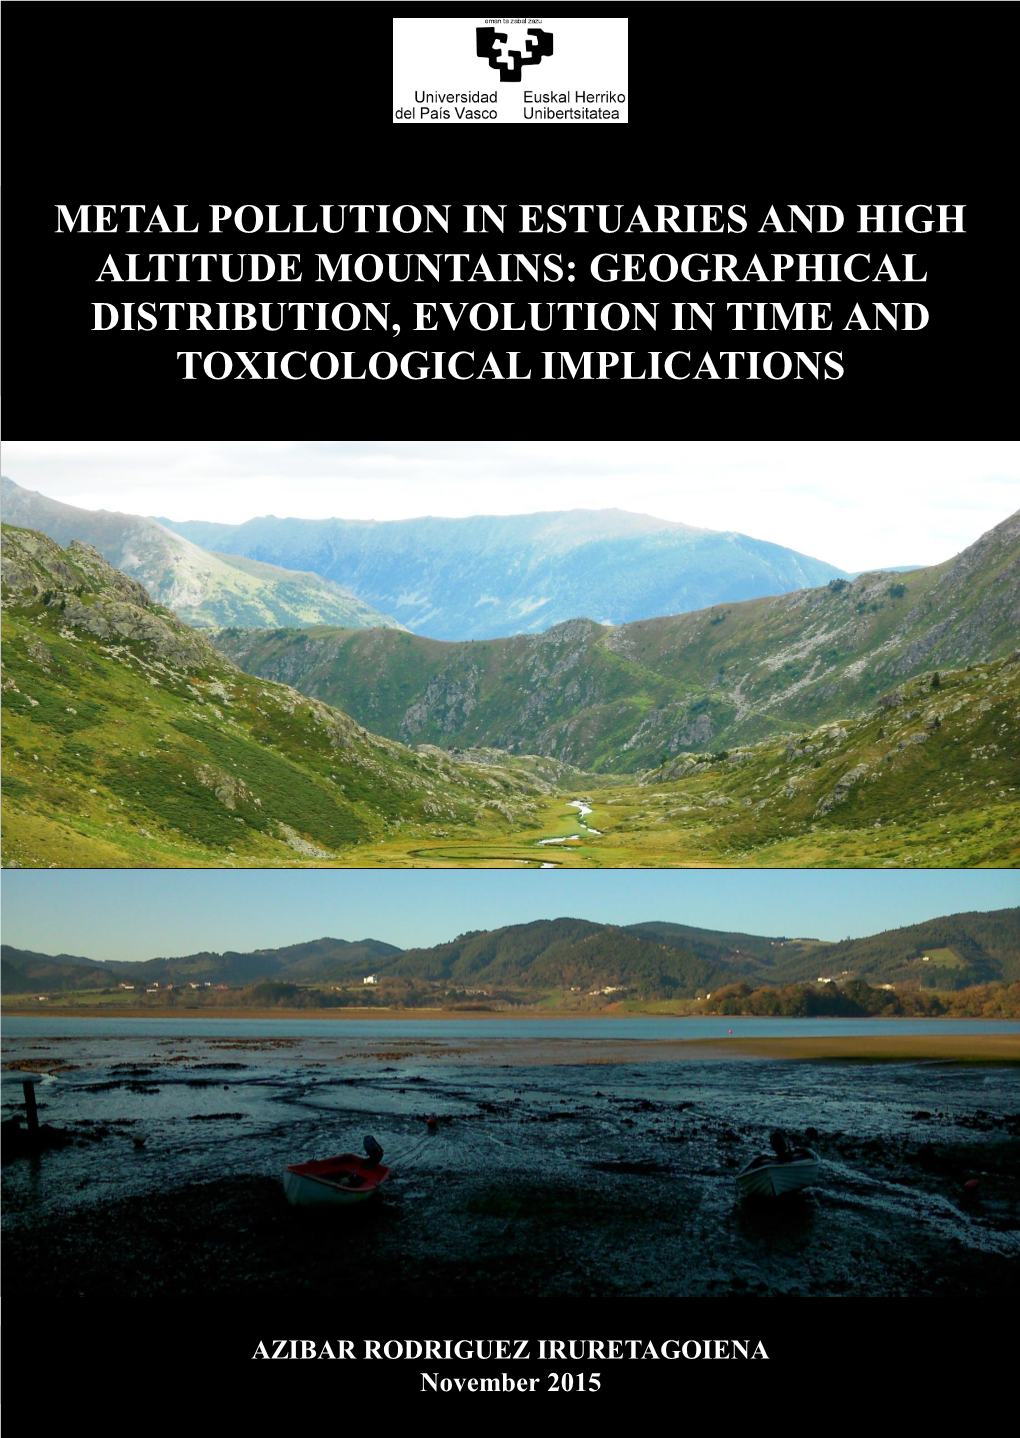 Metal Pollution in Estuaries and High Altitude Mountains: Geographical Distribution, Evolution in Time and Toxicological Implications